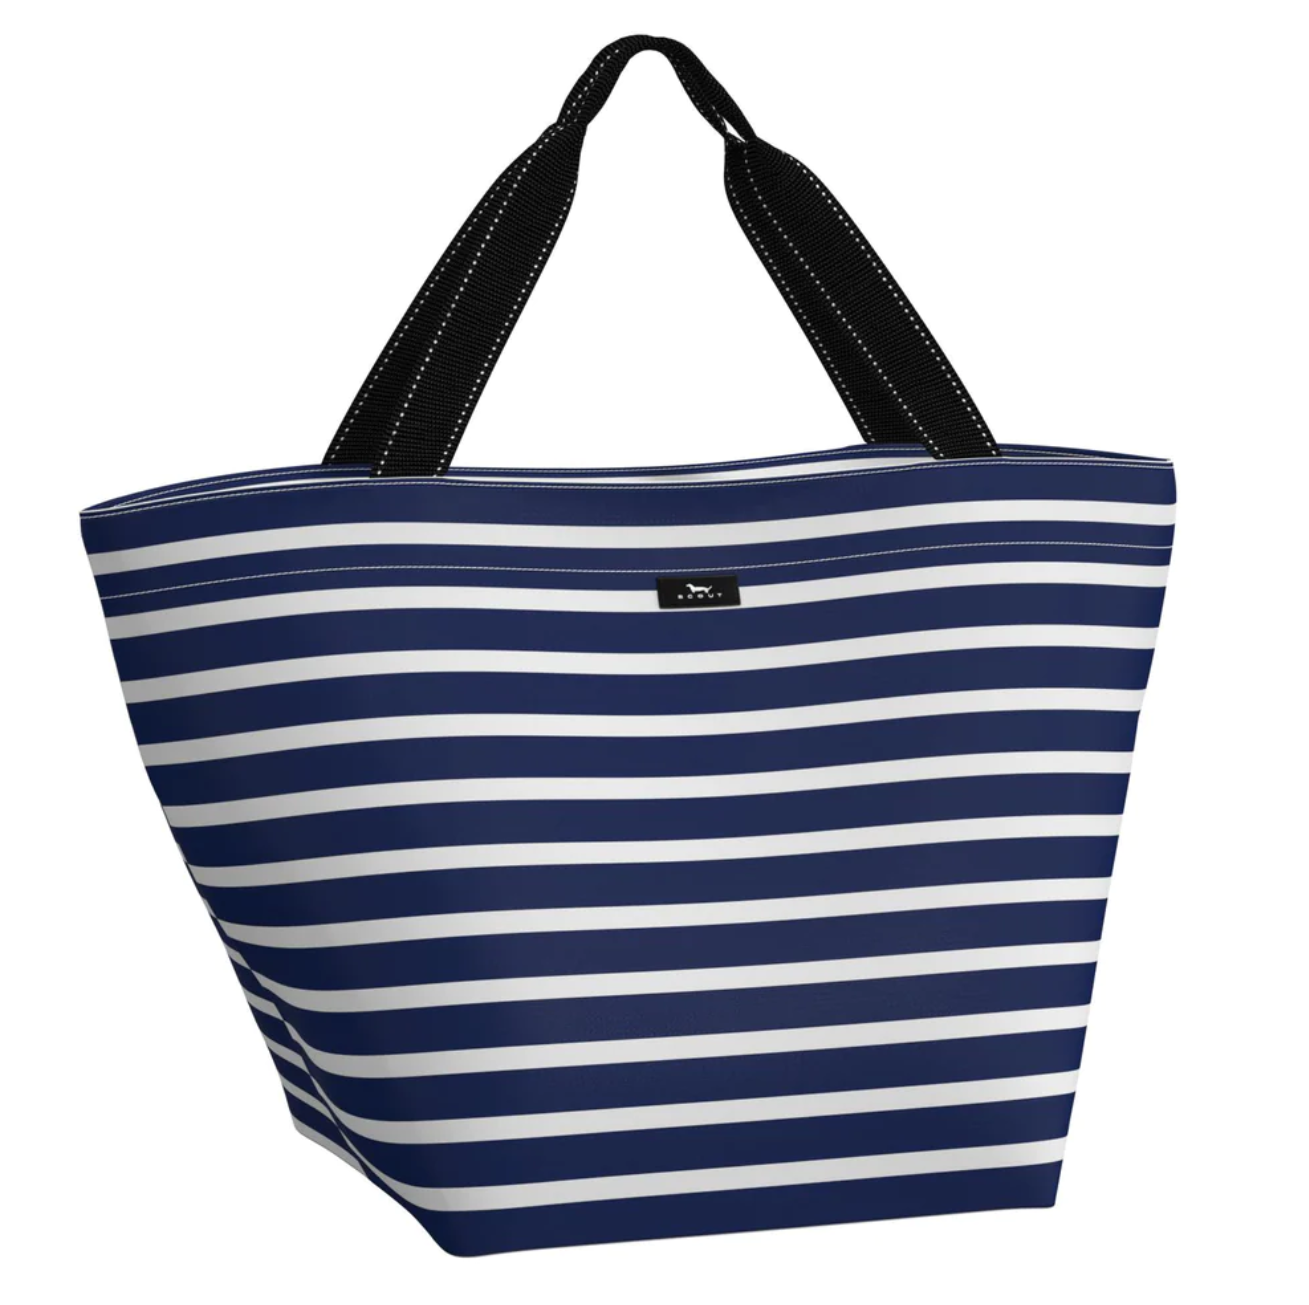 Scout Weekender Tote Luggage, Totes in Nantucket Navy at Wrapsody